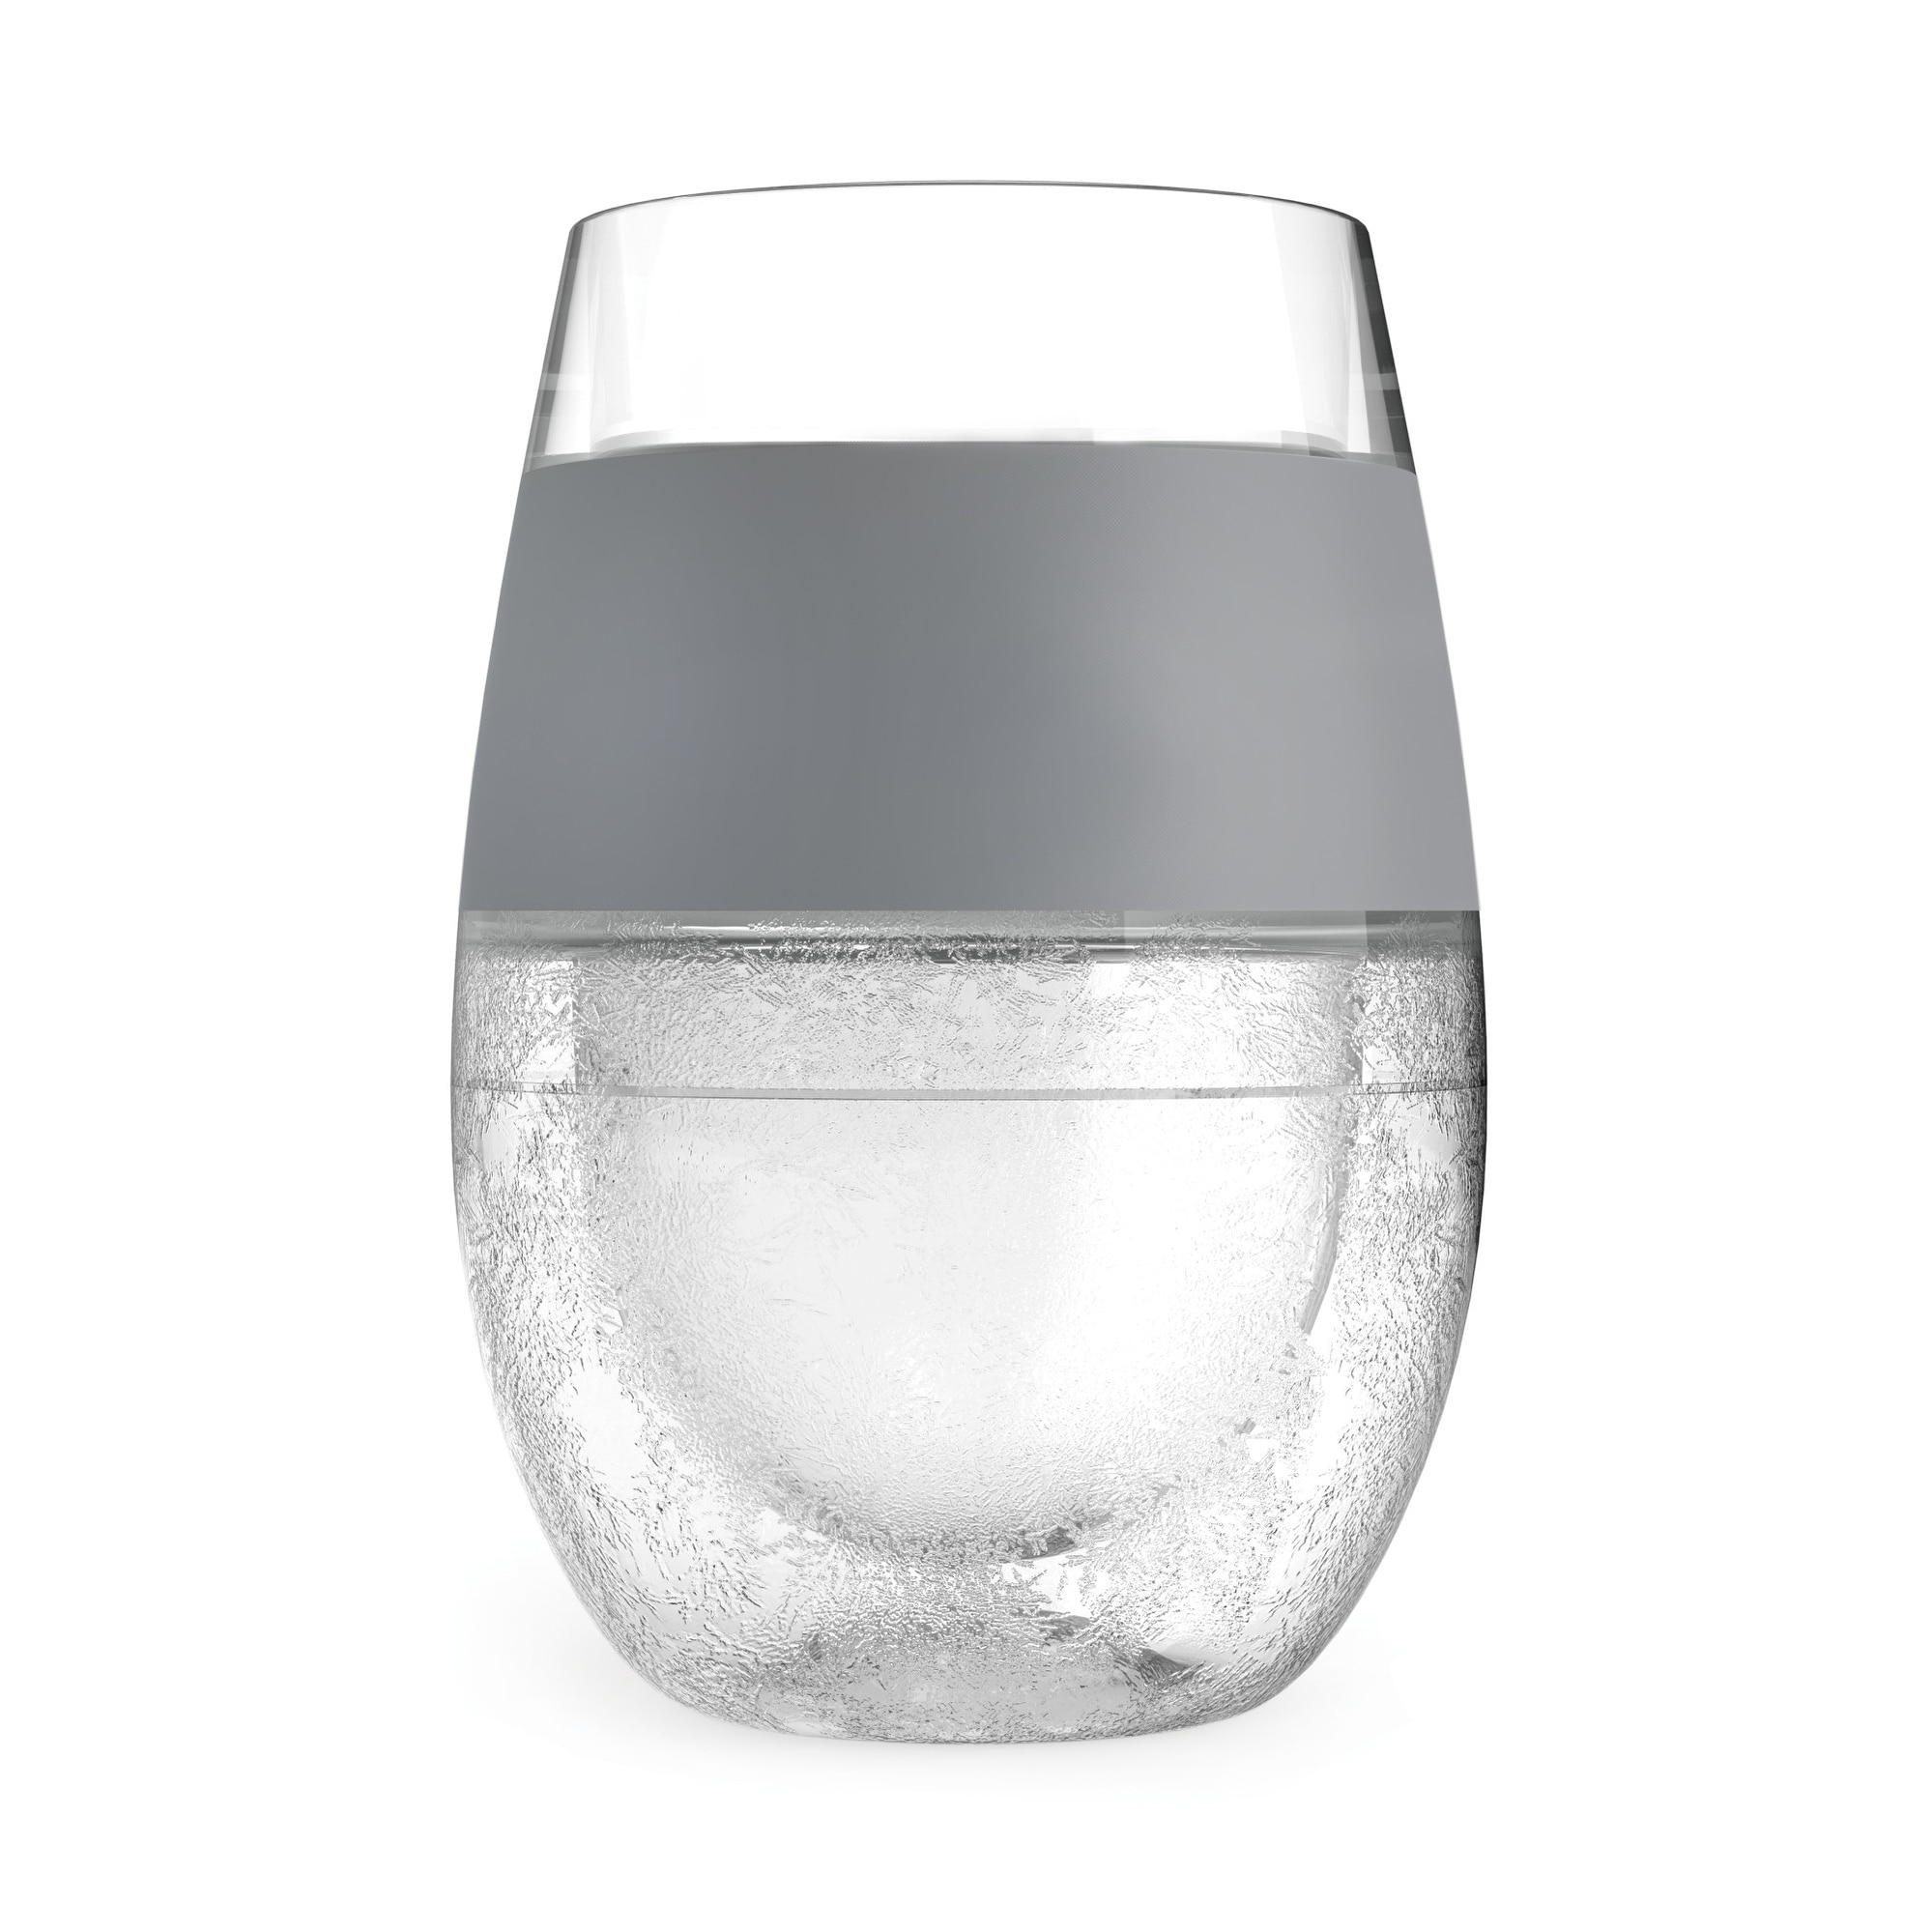 https://ak1.ostkcdn.com/images/products/is/images/direct/dc7613b8b0fb2cc56fb3d52fd1b2b1e53c984603/Wine-FREEZE-Cooling-Cup-in-Grey-%281-pack%29-by-HOST.jpg